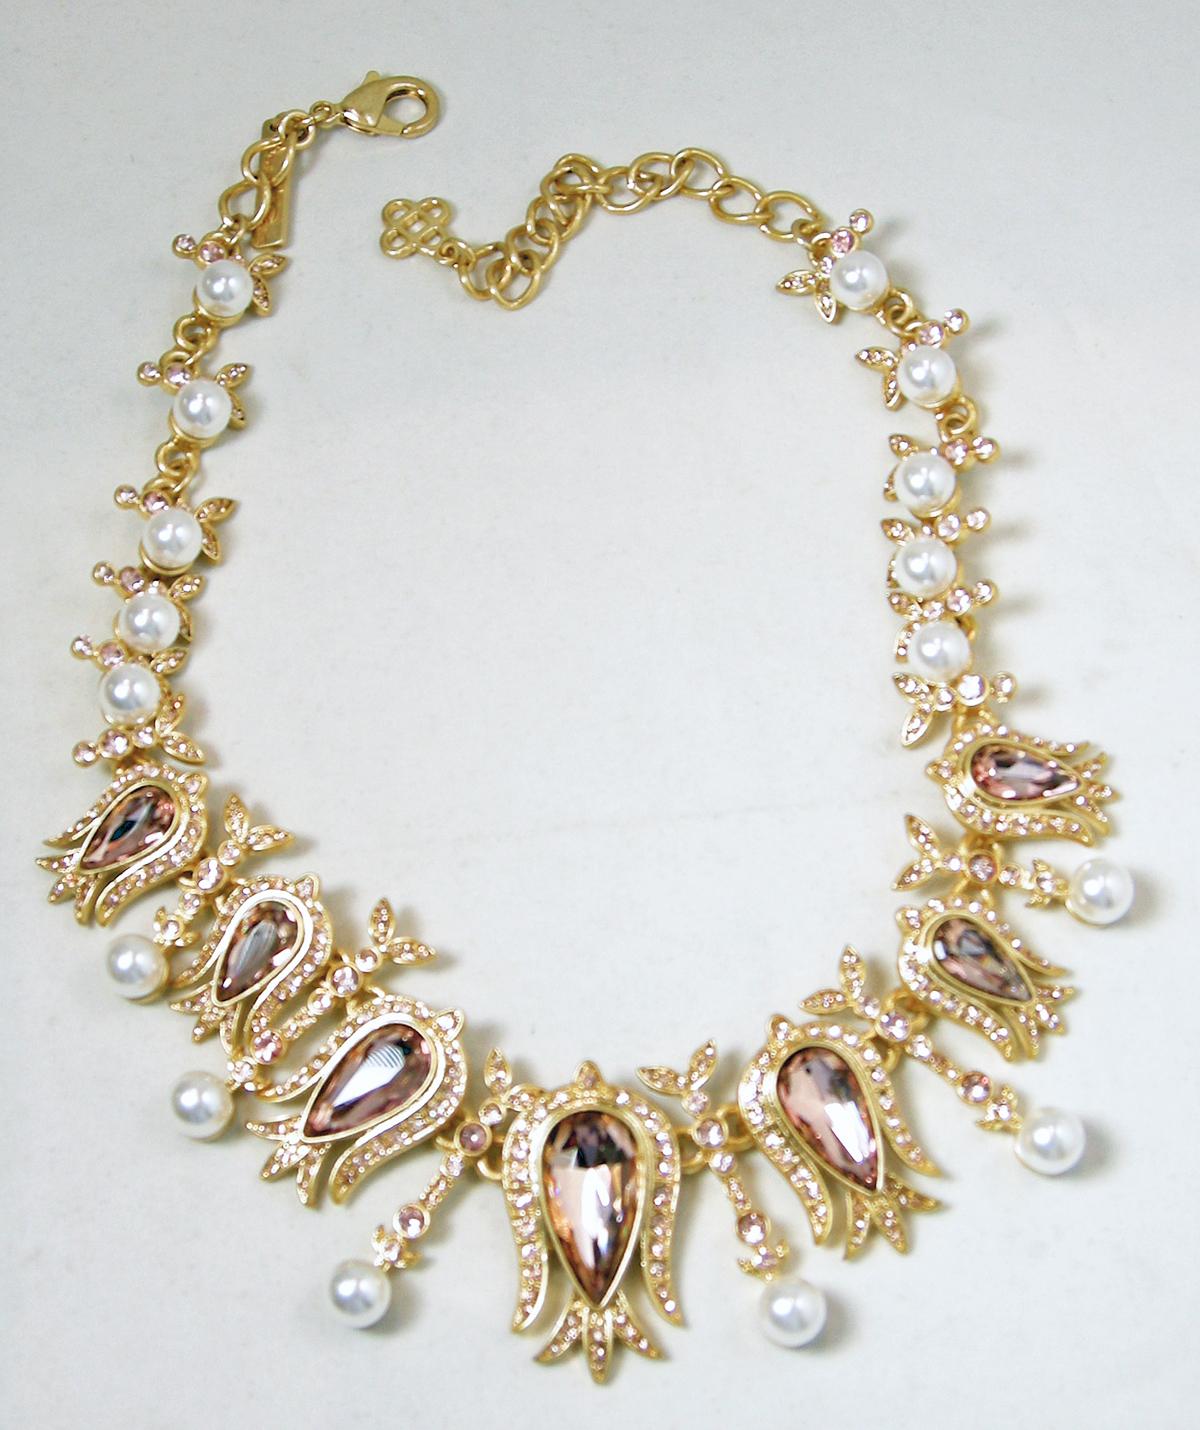 This signed Oscar de la Renta necklace has faux pearls with light amethyst crystals with clear crystals accents  in a gold tone setting.  This necklace measures 18-1/2” long with a spring clasp x 1-1/2” wide at the center.  In excellent condition,